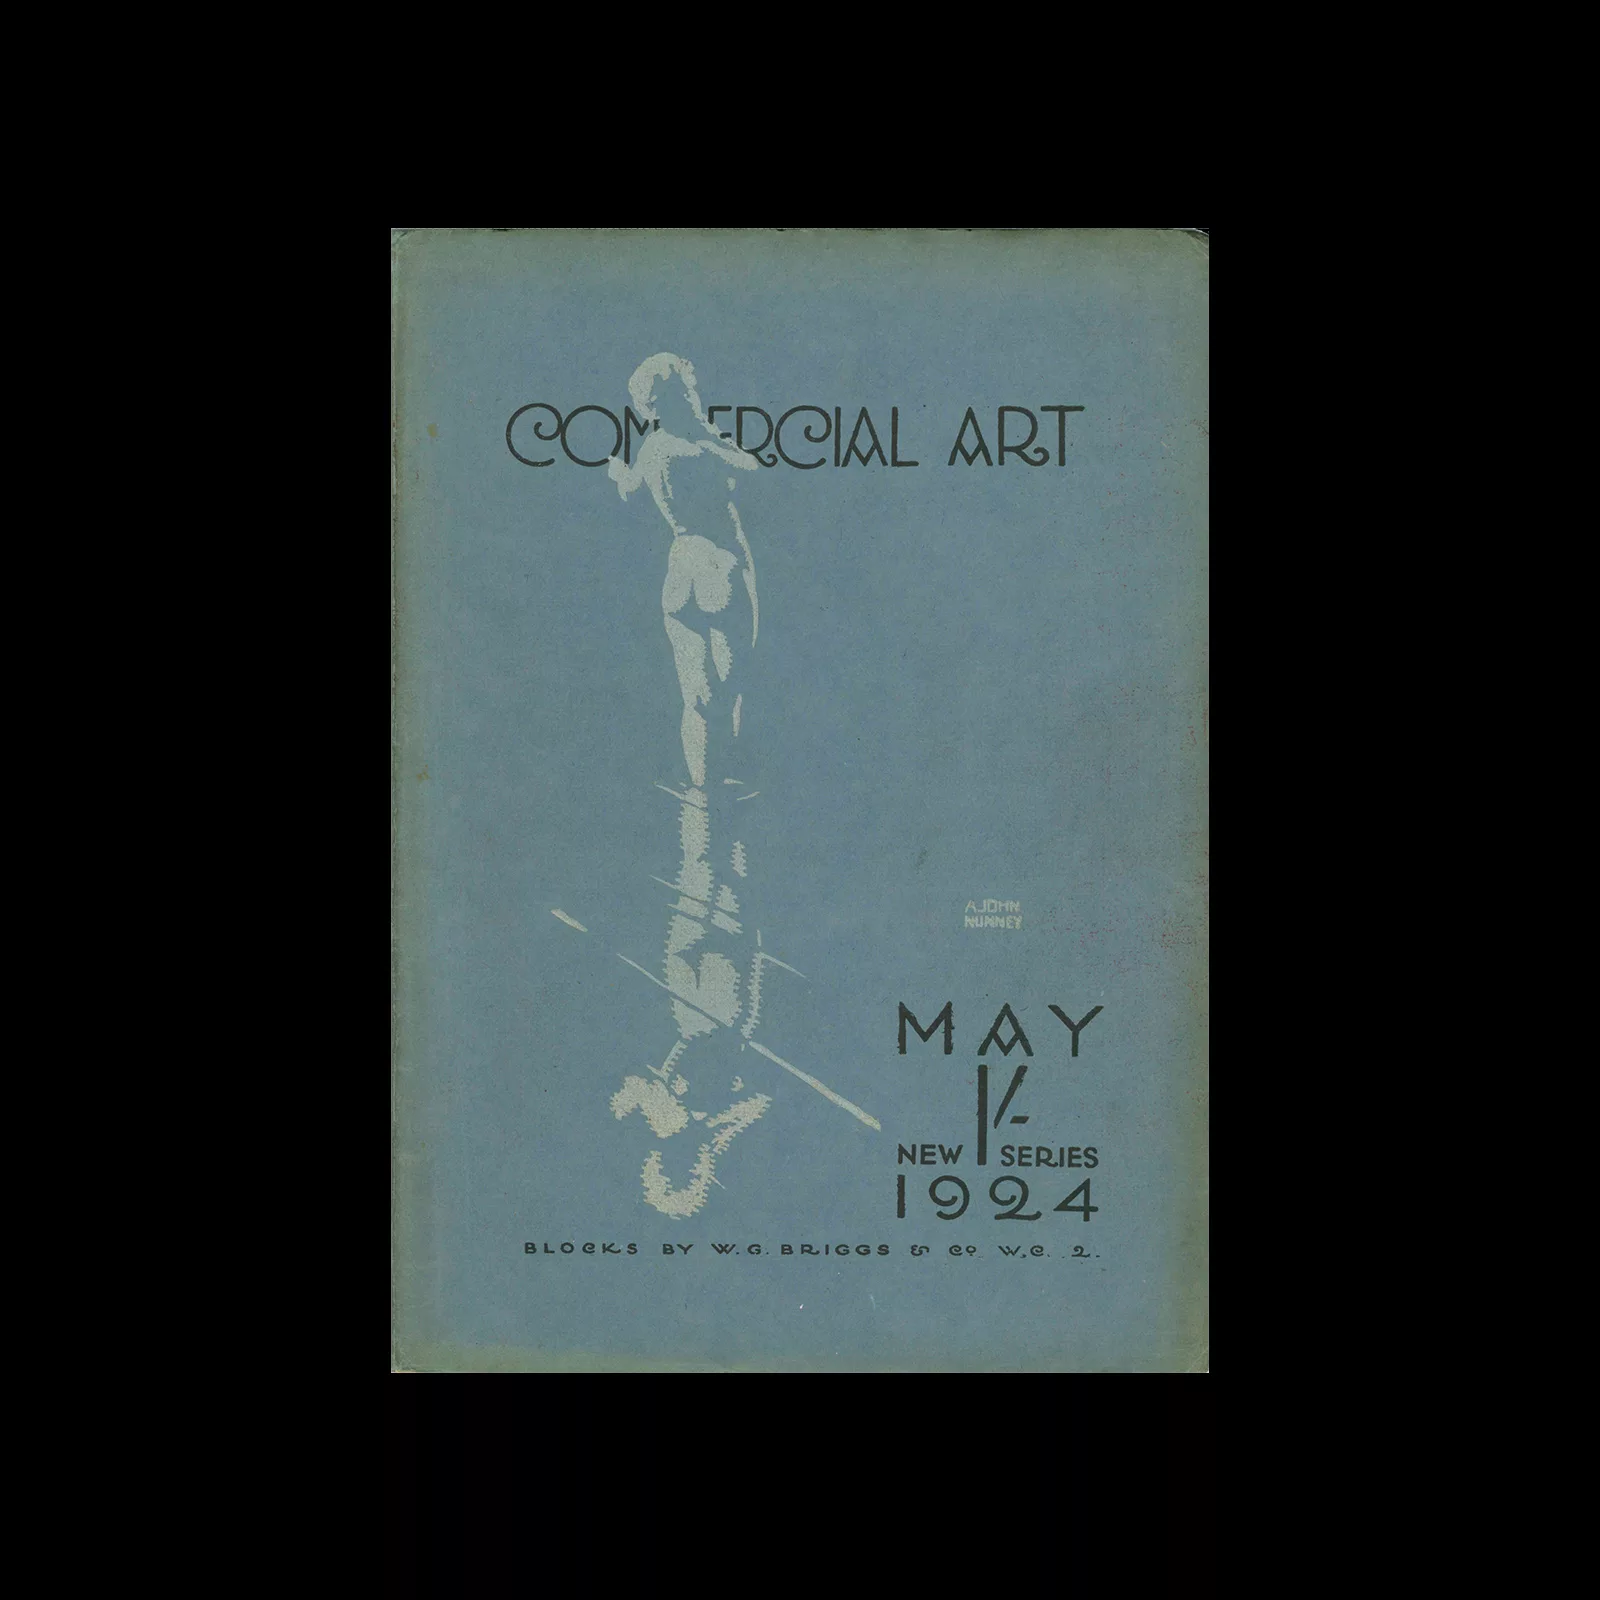 Commercial Art Vol 2, No 1, May 1924. Cover illustration by Alfred John Nunney